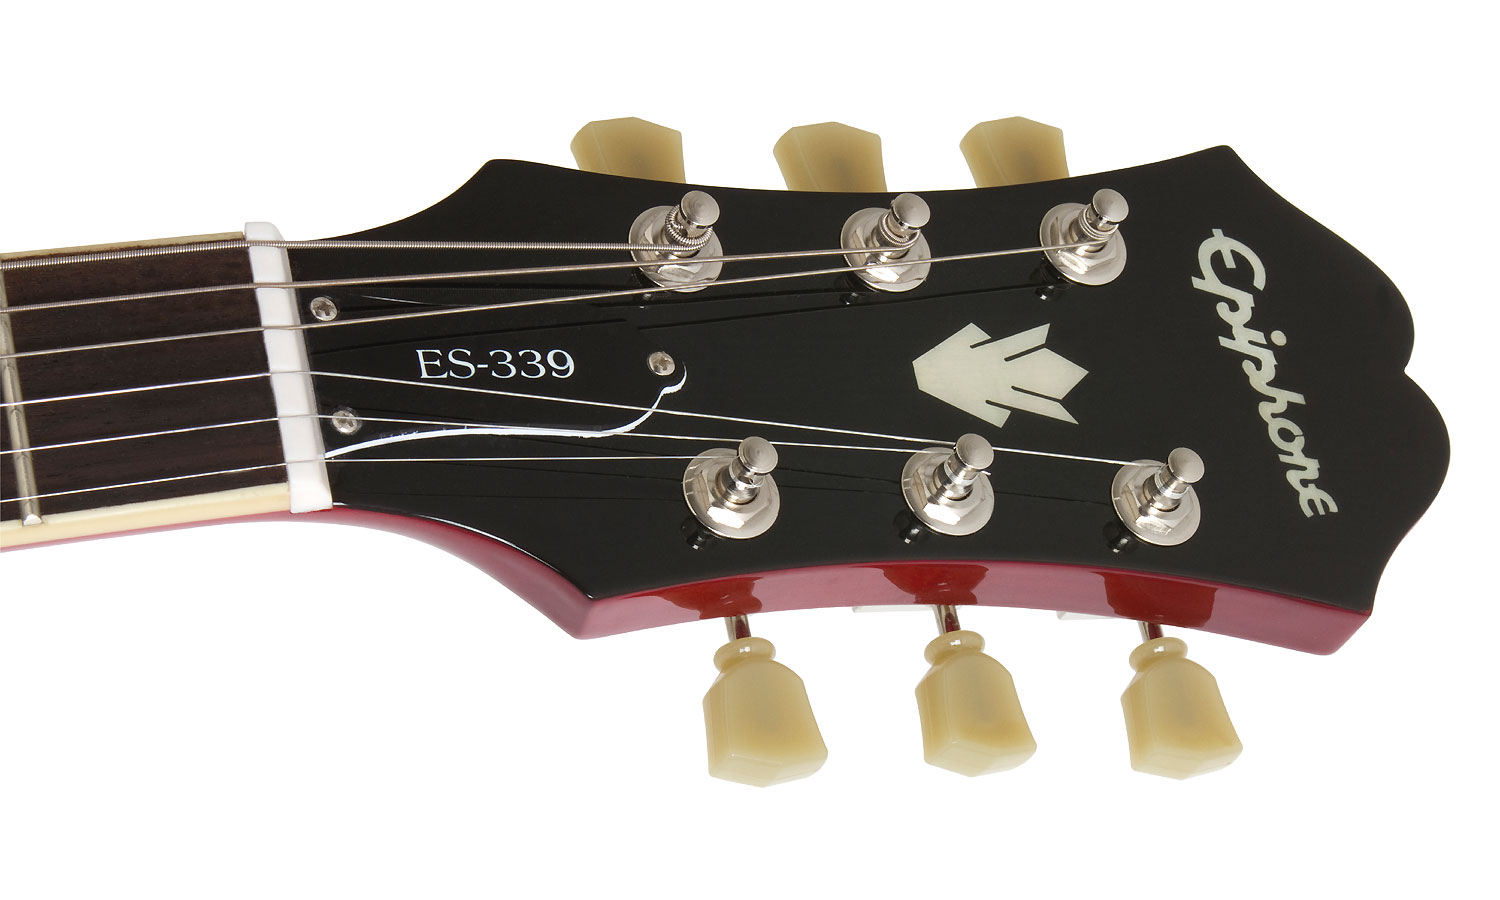 Epiphone Es-339 Inspired By Gibson 2020 2h Ht Rw - Cherry - Guitare Électrique 1/2 Caisse - Variation 2